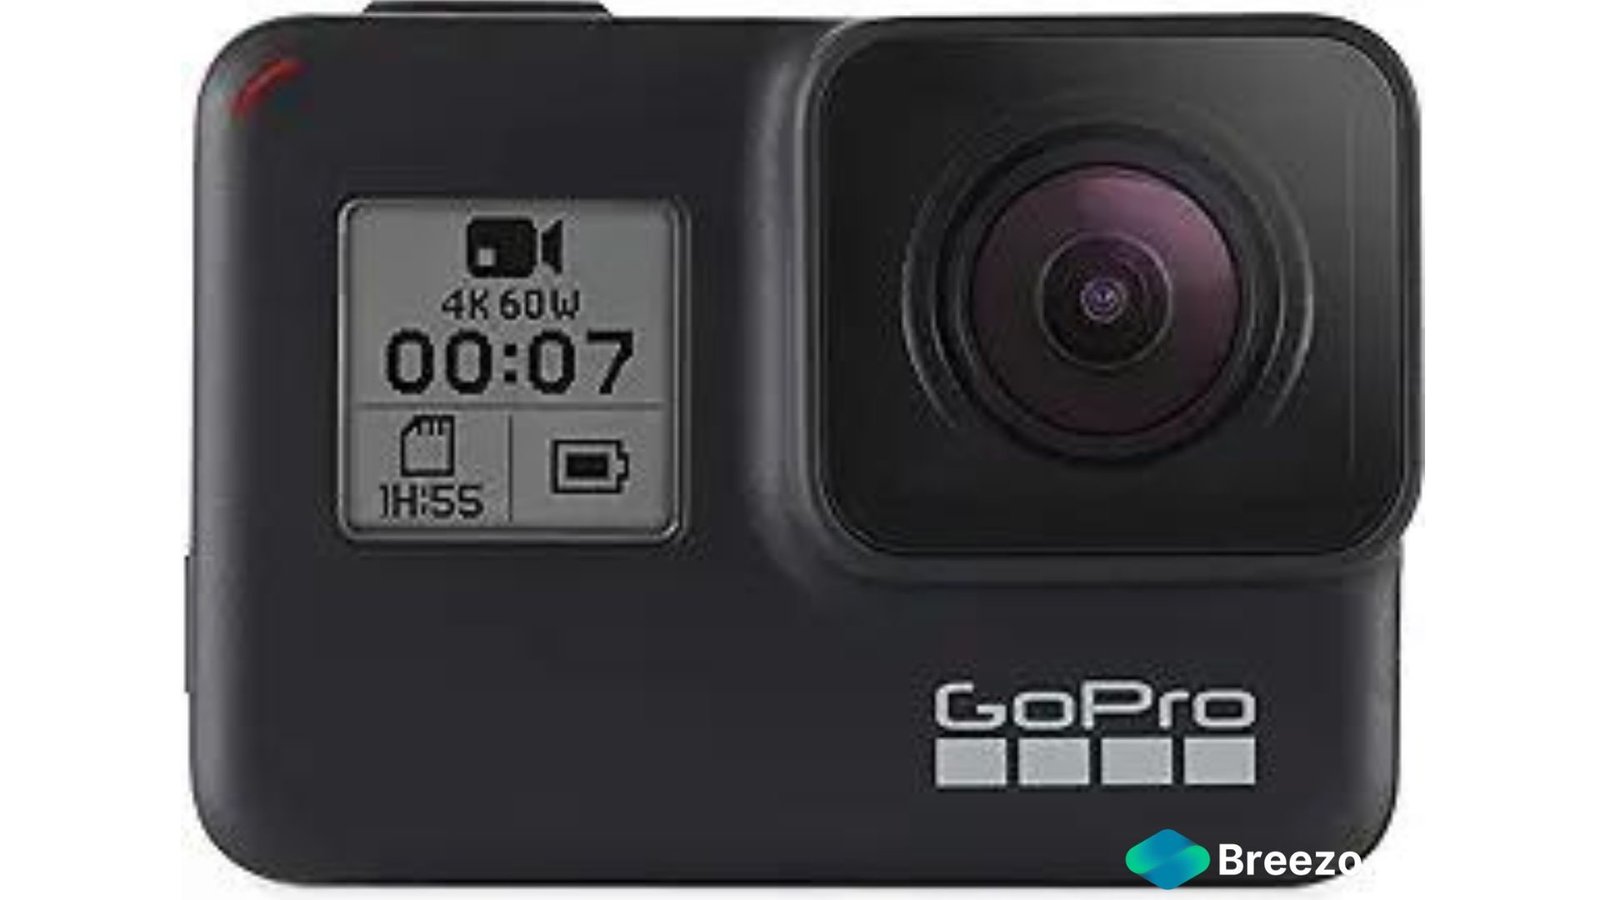 Rent GoPro Hero 7 Camera With All Accessories in Delhi NCR, Camera accessories, Camera lenses for rent, in Delhi Gurgaon Noida, hire Shooting equipment, Lighting equipment rental, Film gear rental for Video production, camera rental company in Delhi, film equipment rental company